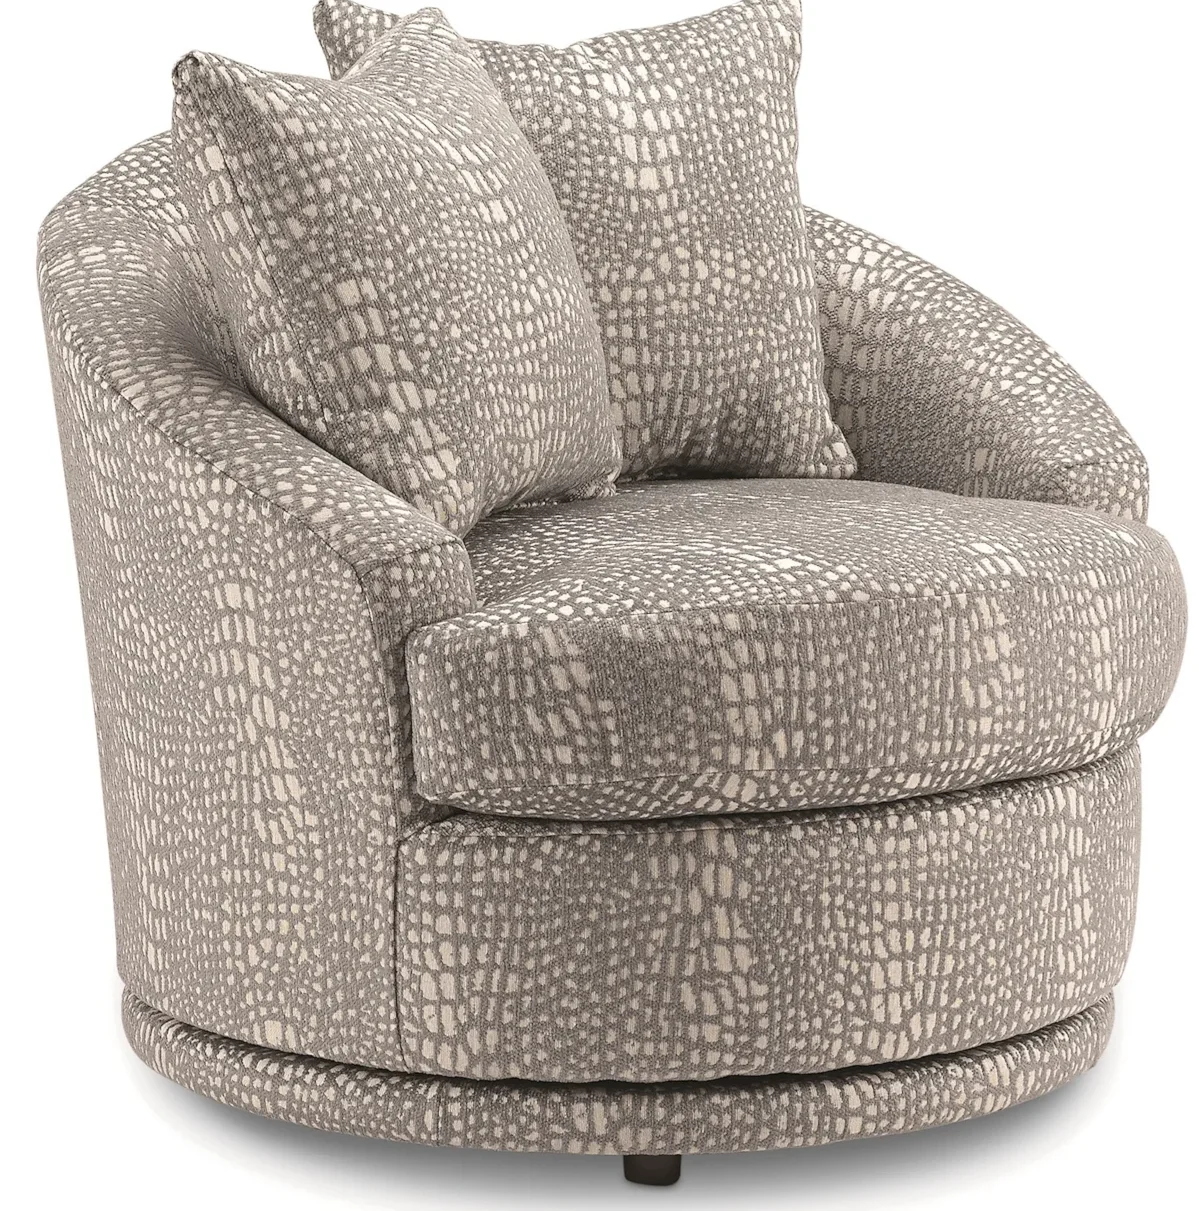 Round swivel chair with a reptile skin pattern. 